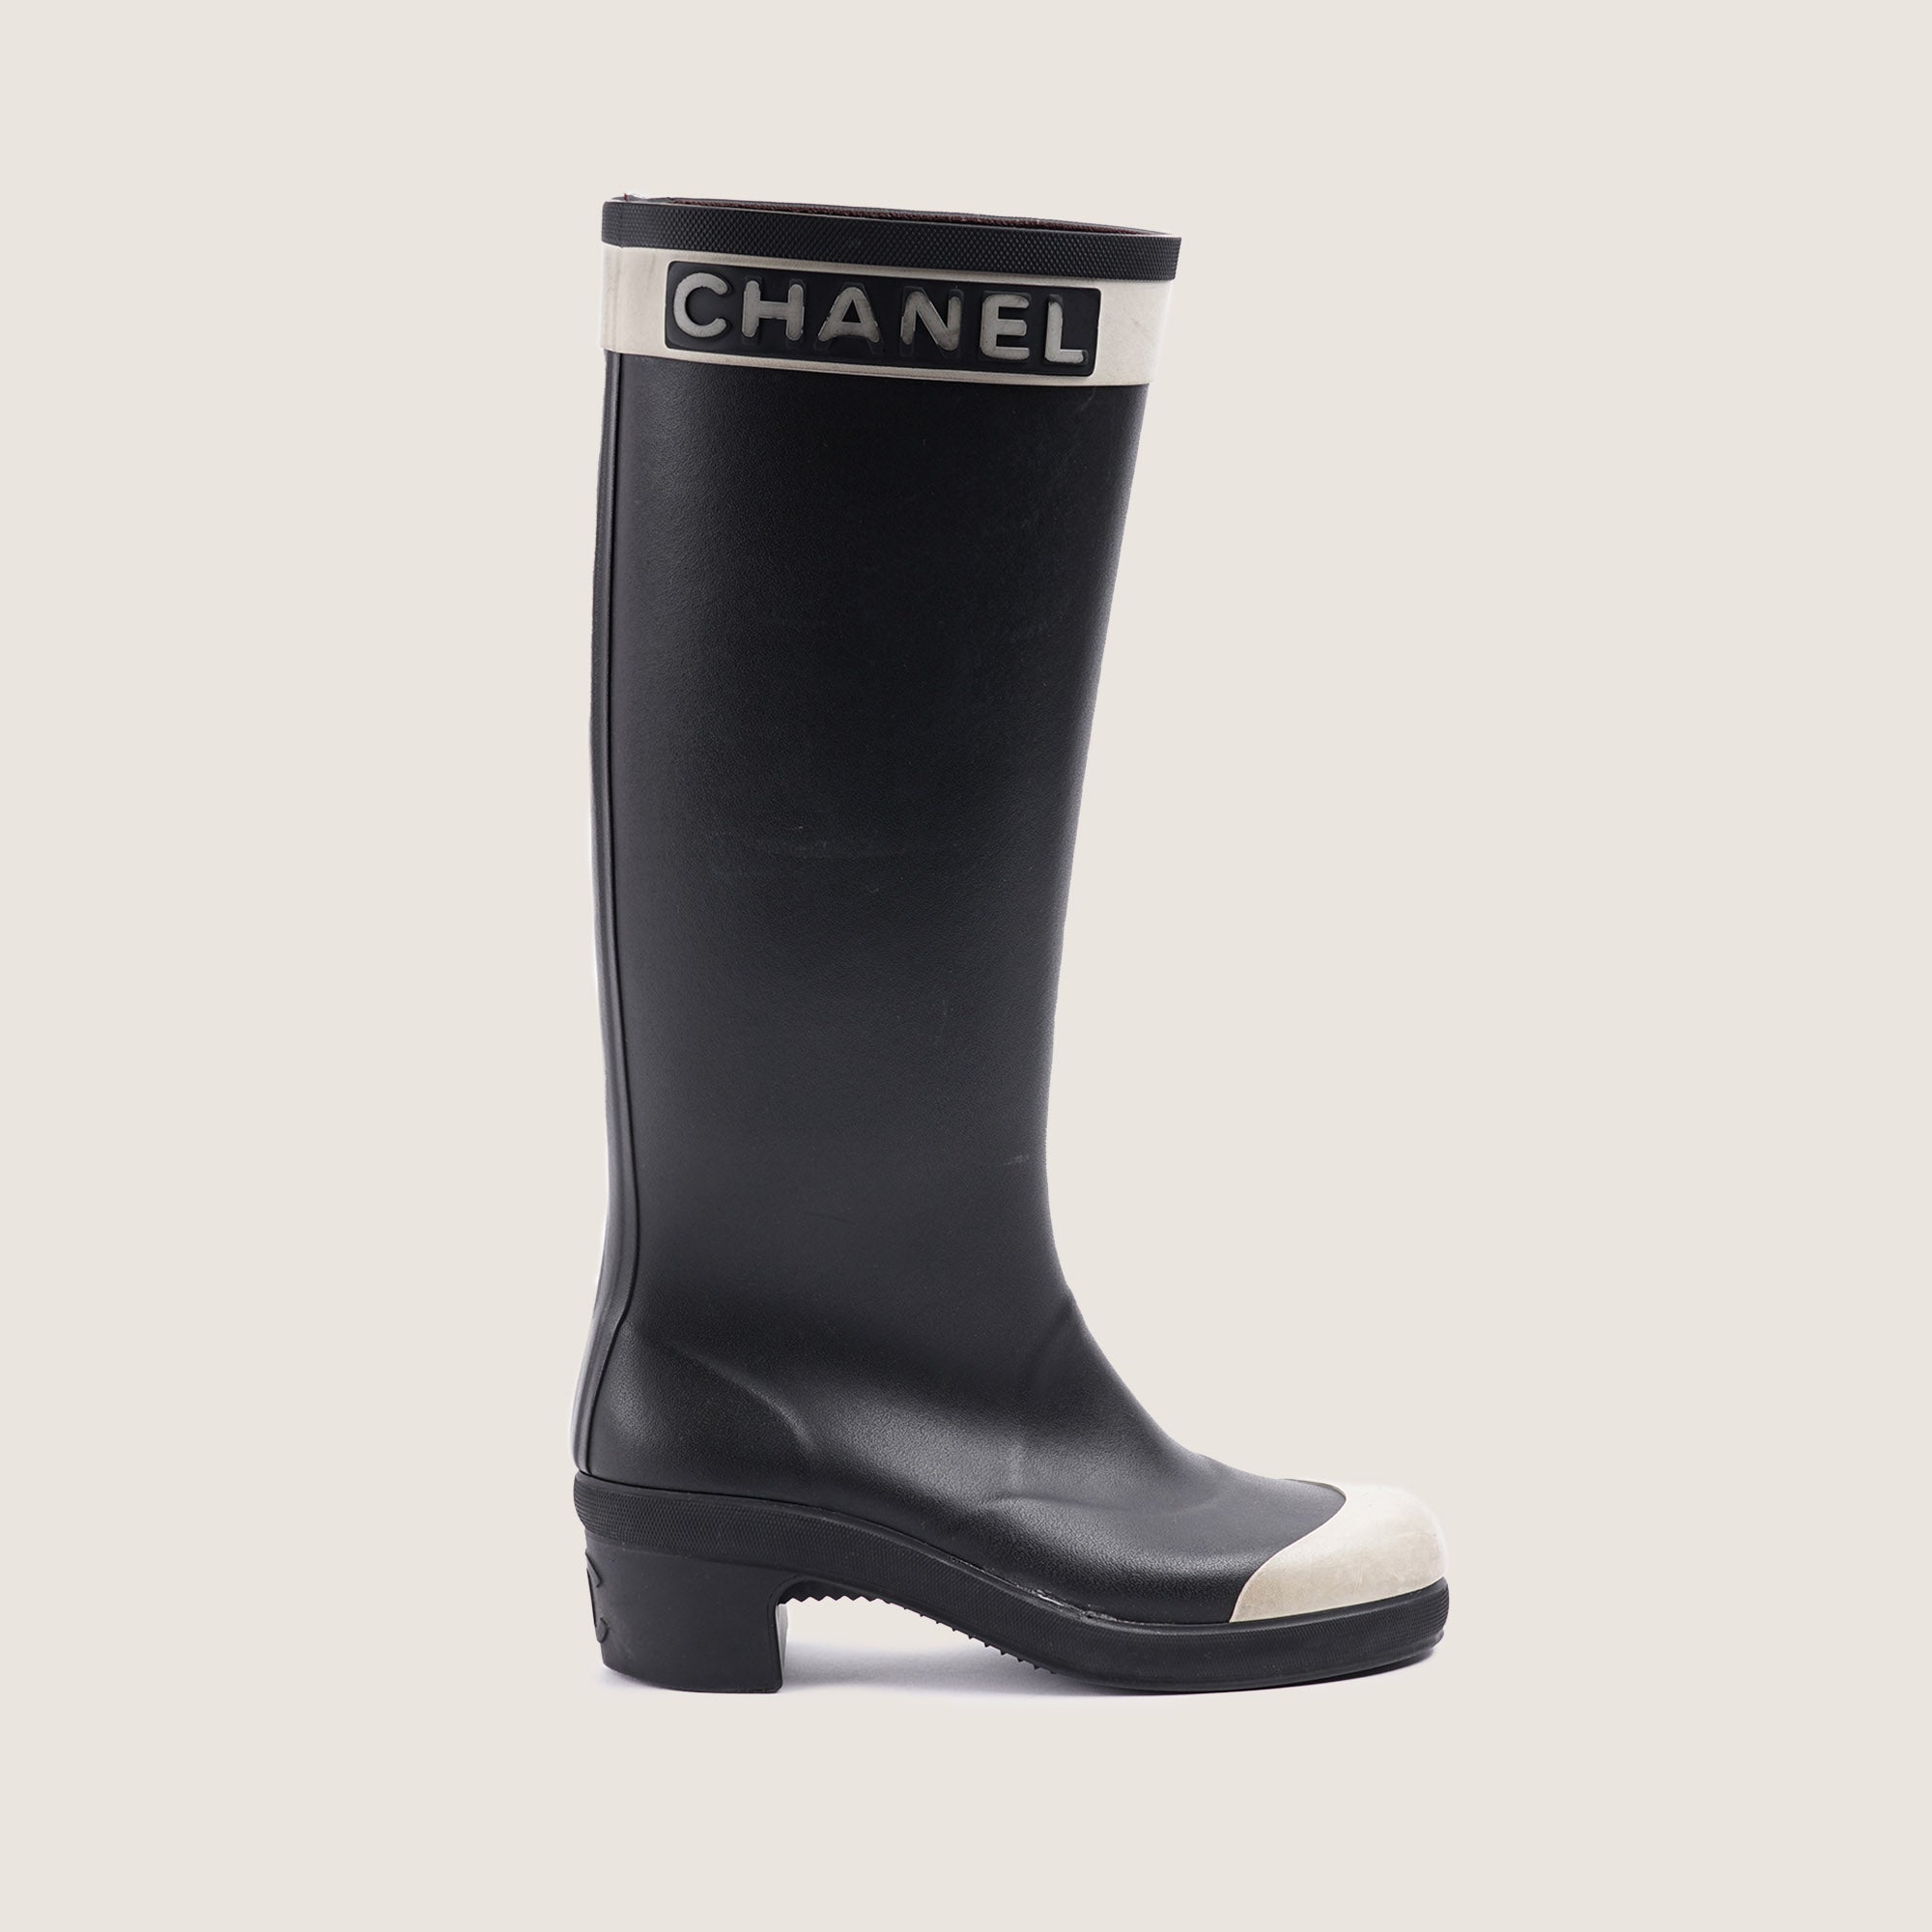 Rain Boots Black & White 37 - CHANEL - Affordable Luxury